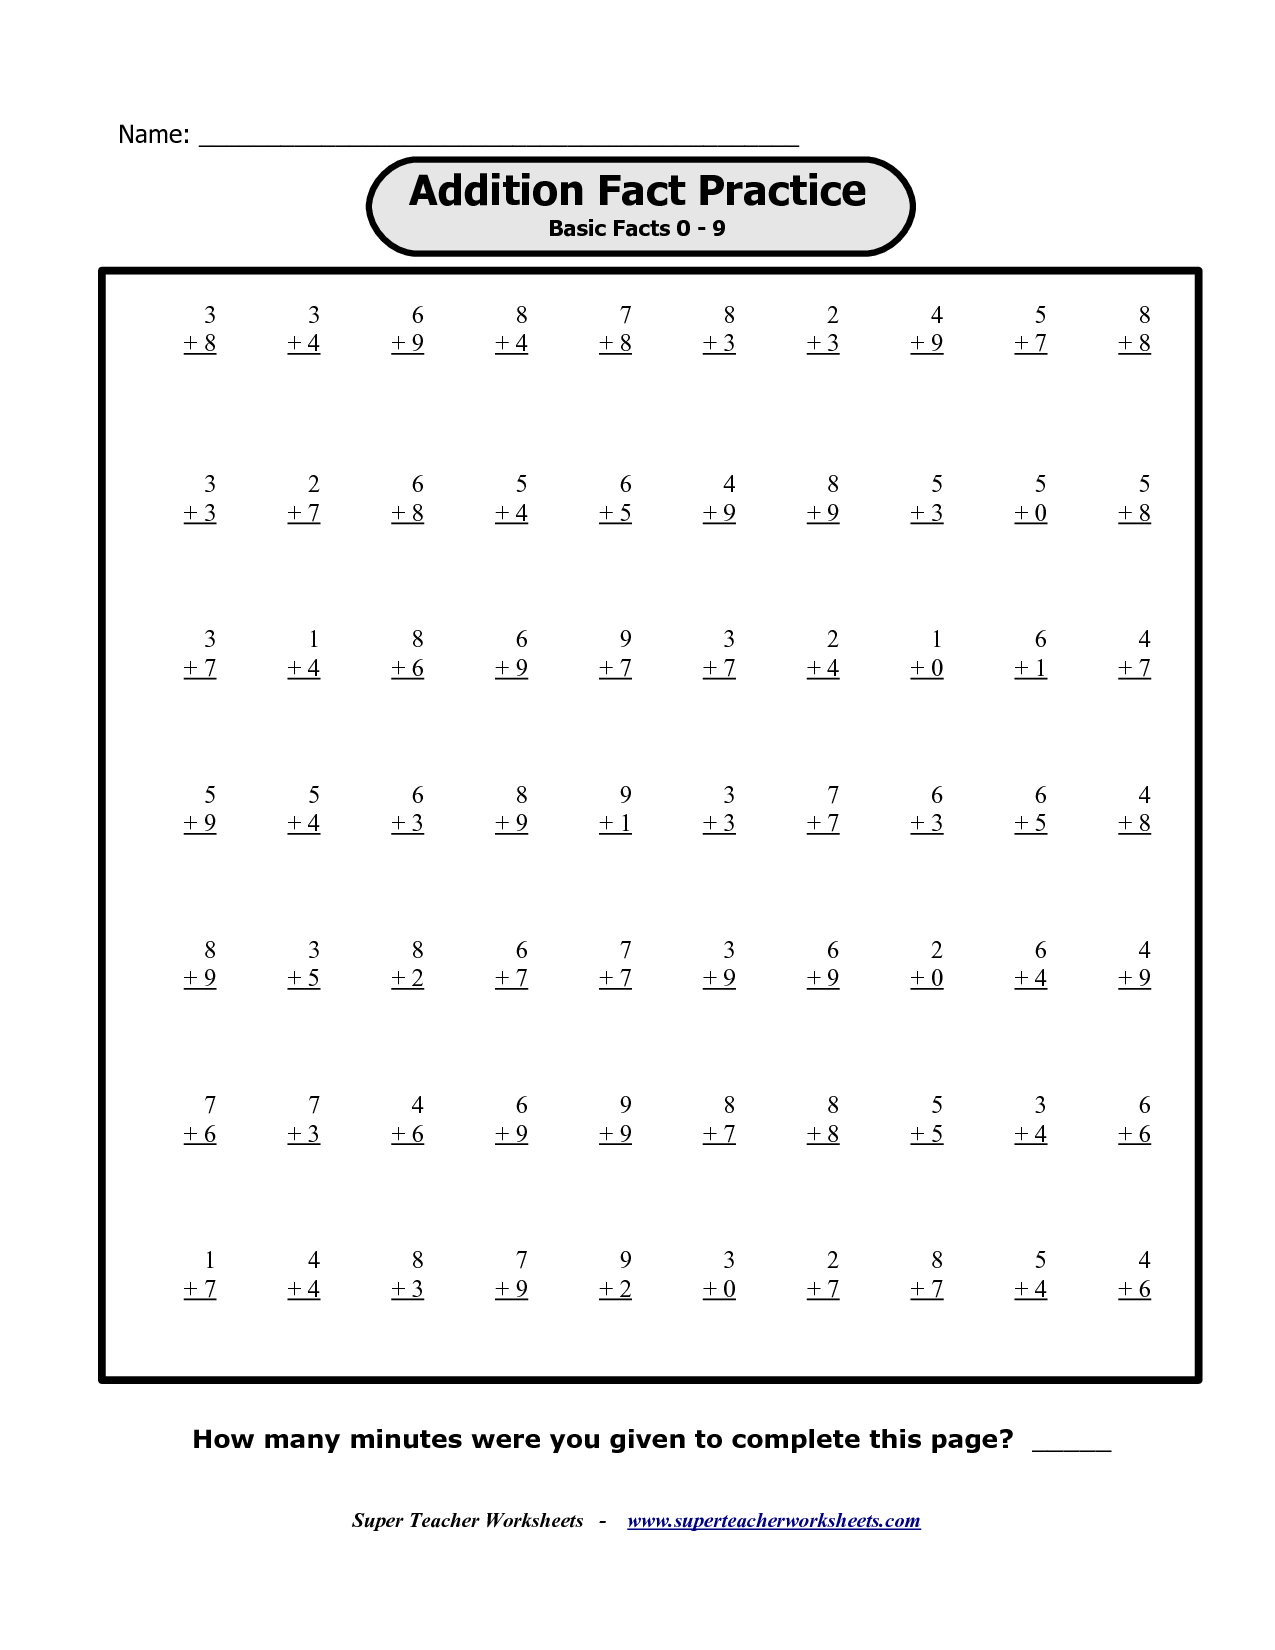 multiplication-facts-printable-worksheets